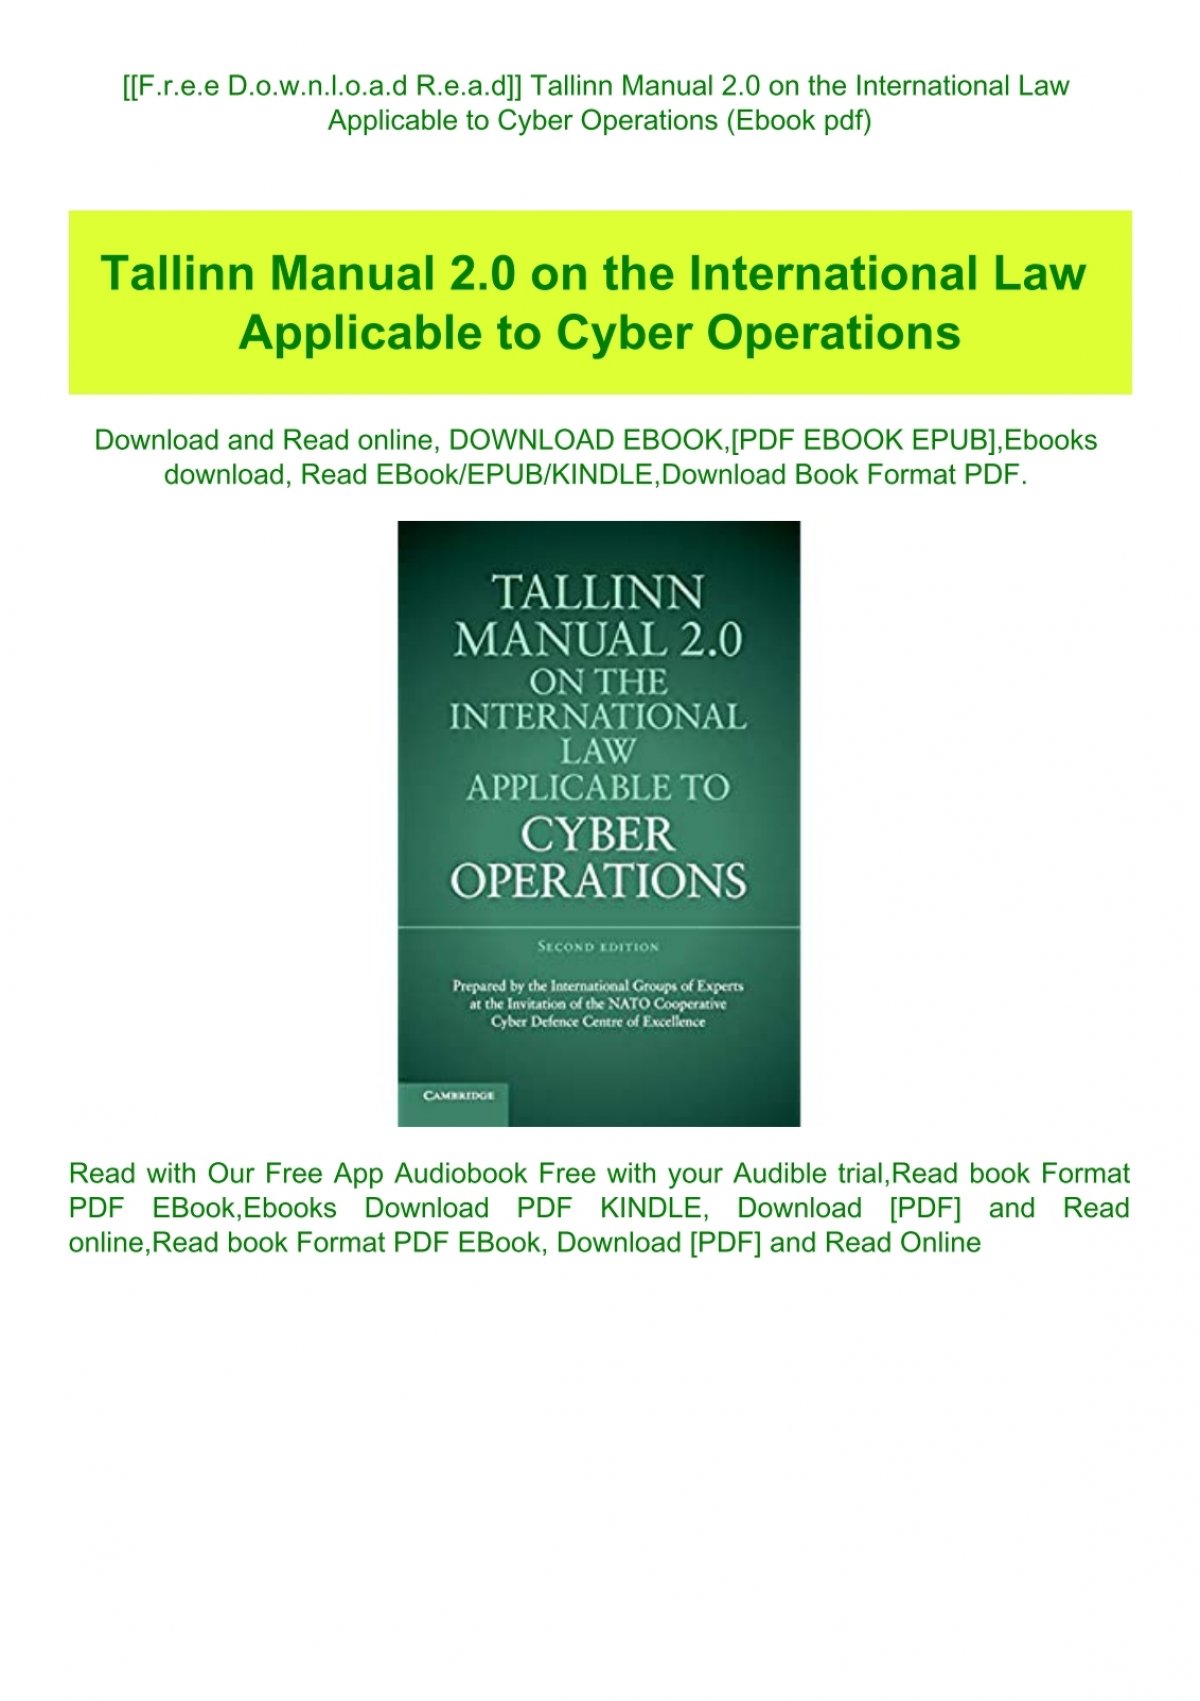 F R E E D O W N L O A D R E A D Tallinn Manual 2 0 On The International Law Applicable To Cyber Operations Ebook Pdf